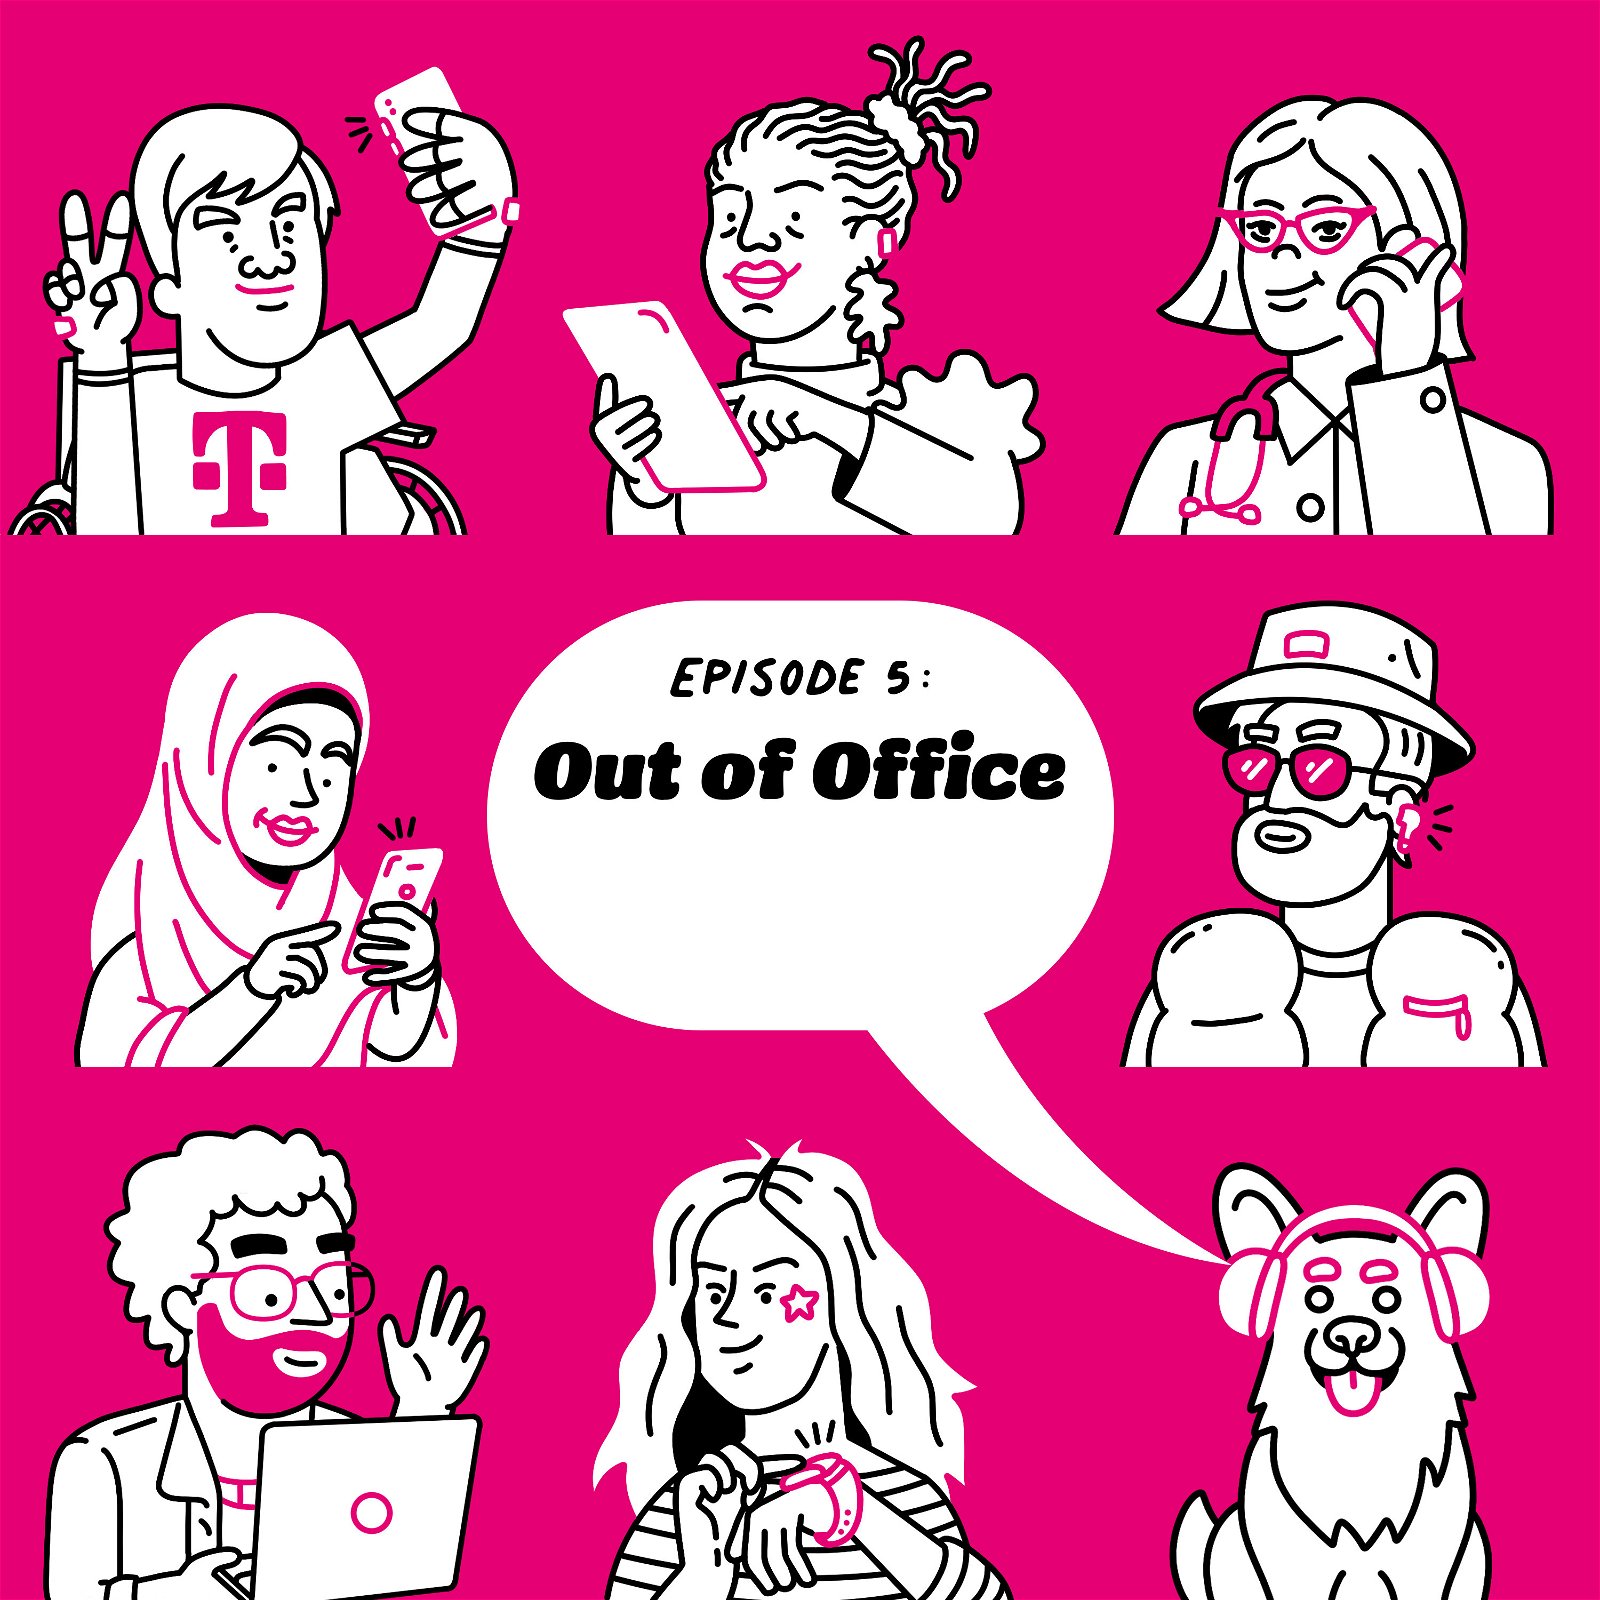 Out of Office: Mobile Diaries Takes Off